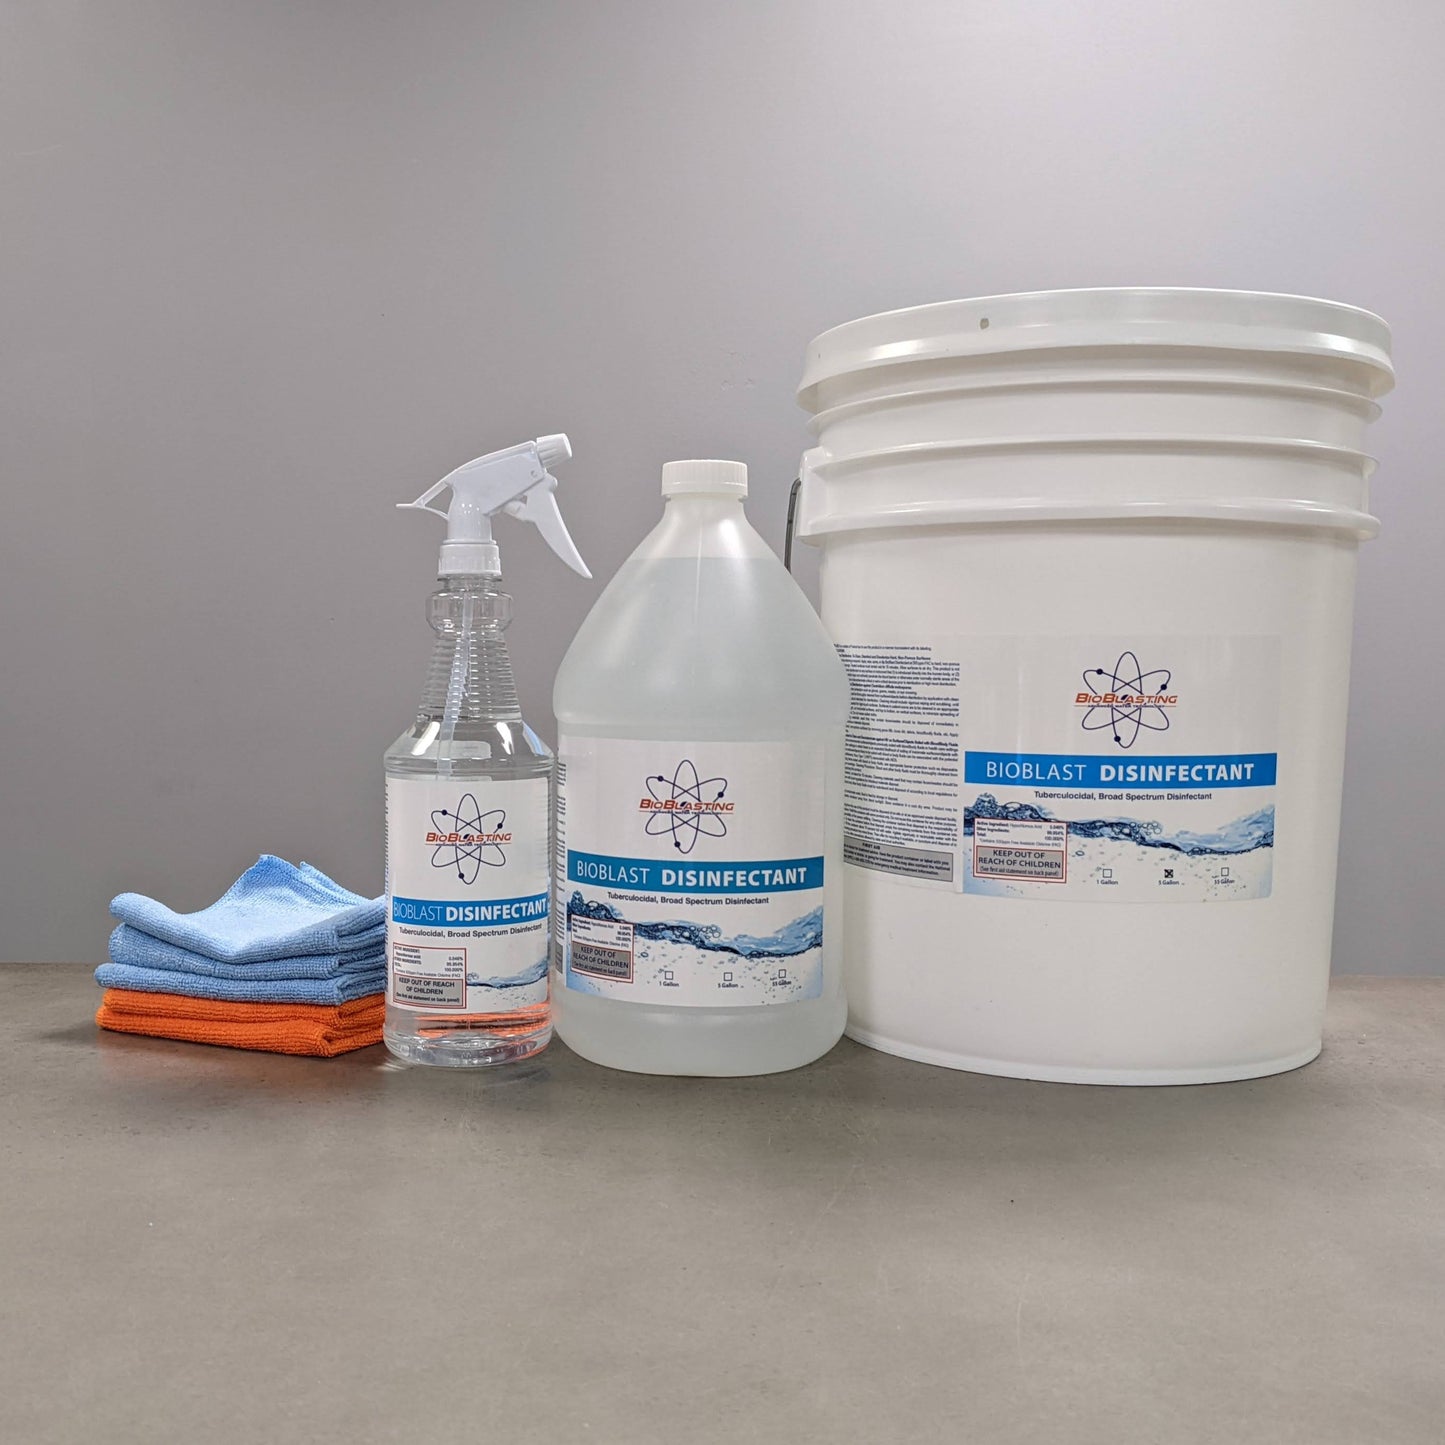 1 Case BioBlast Disinfectant® = 4 pack of (1) gallon containers